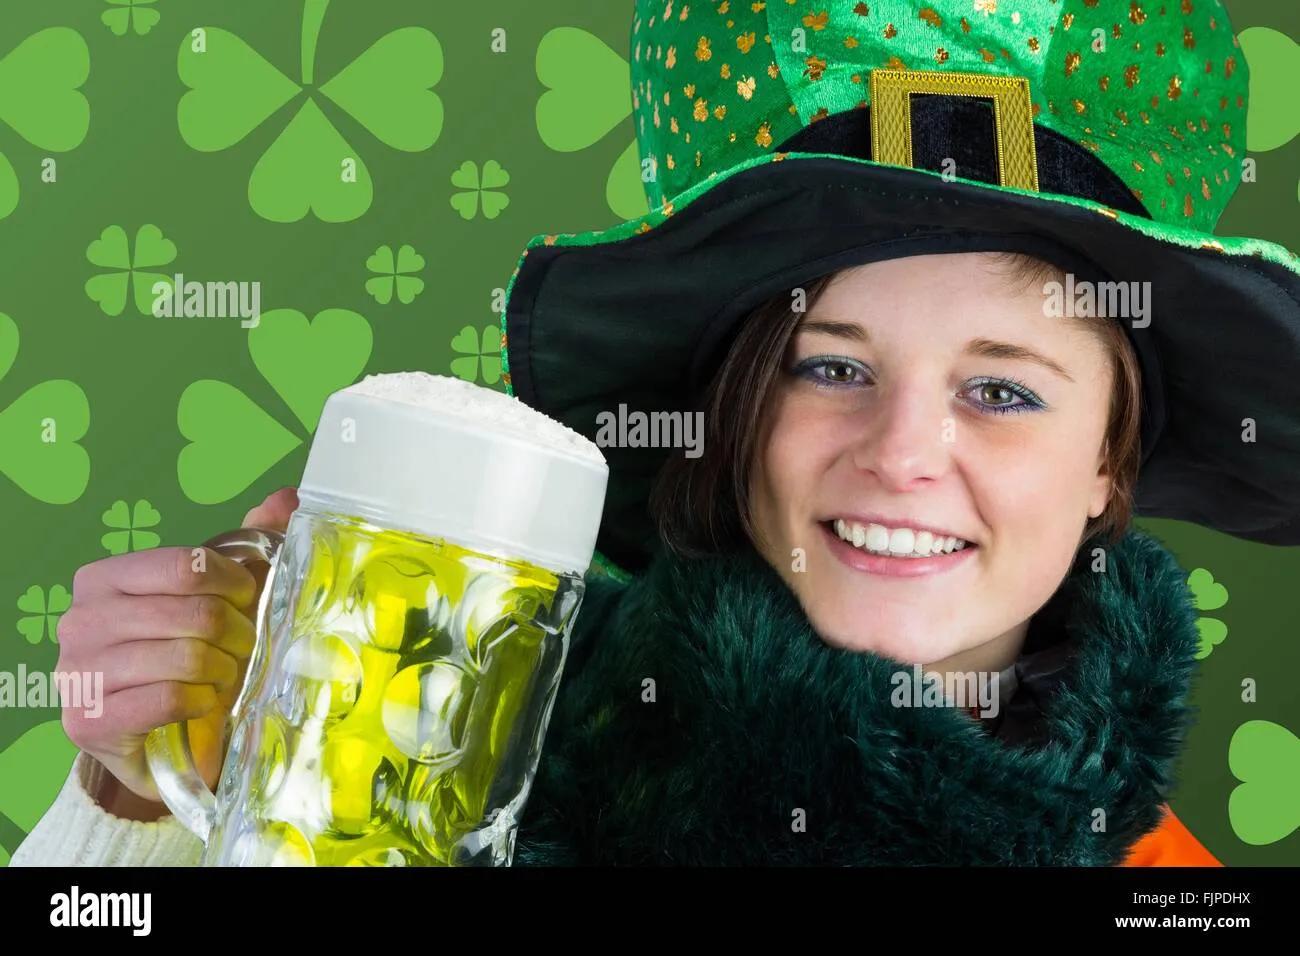 Picture for st patricks day Stock Photo - Alamy